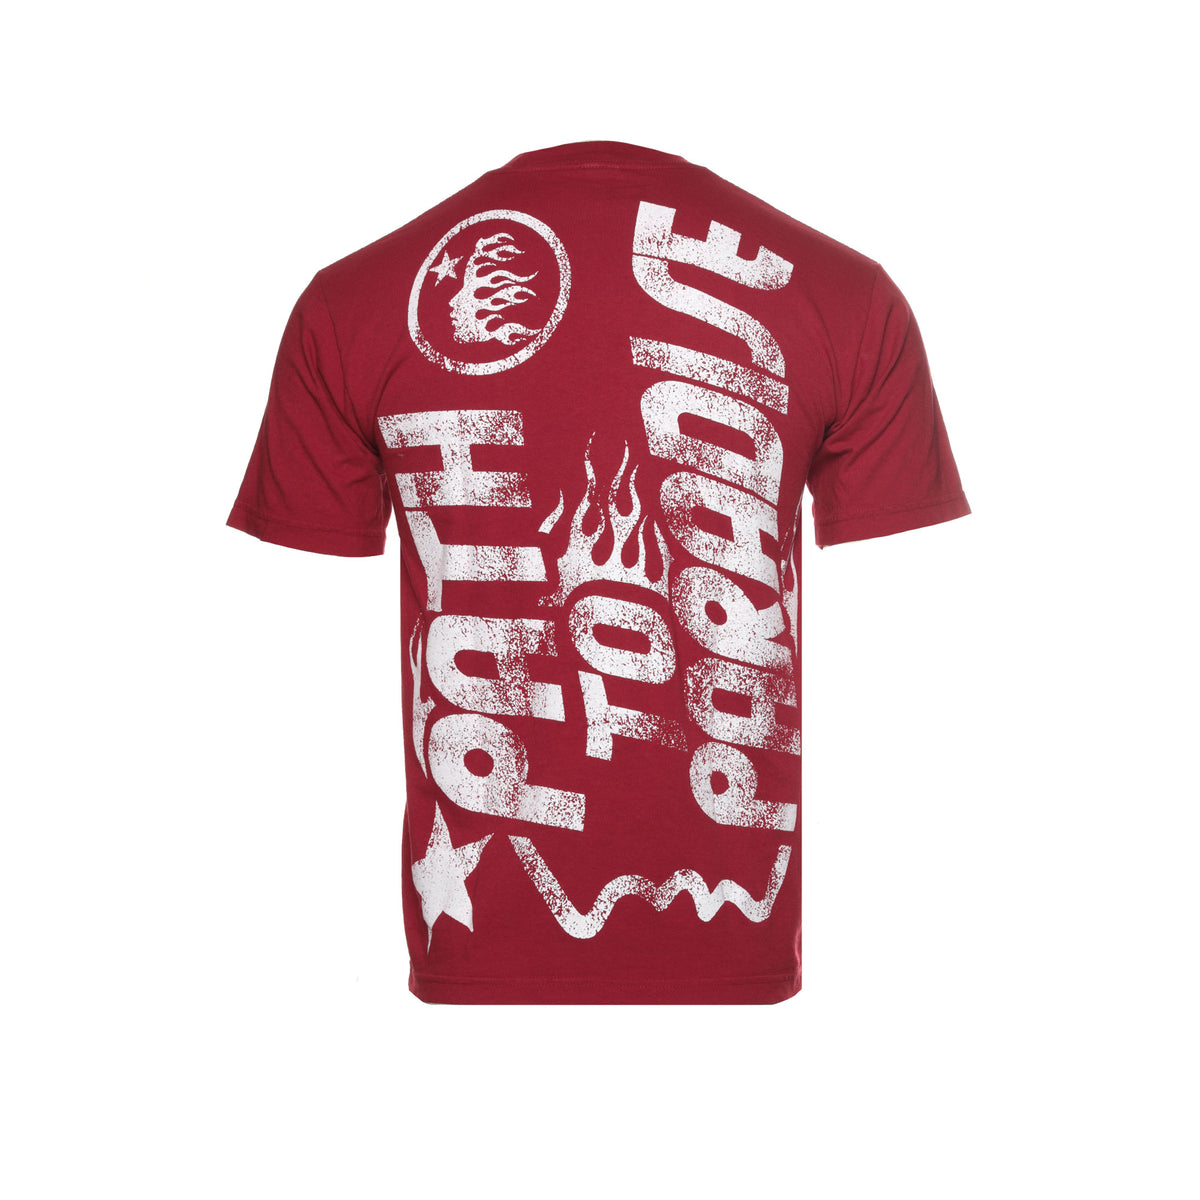 Hellstar "Path to Paradise" Men's Red SS Tee - SIZE Boutique